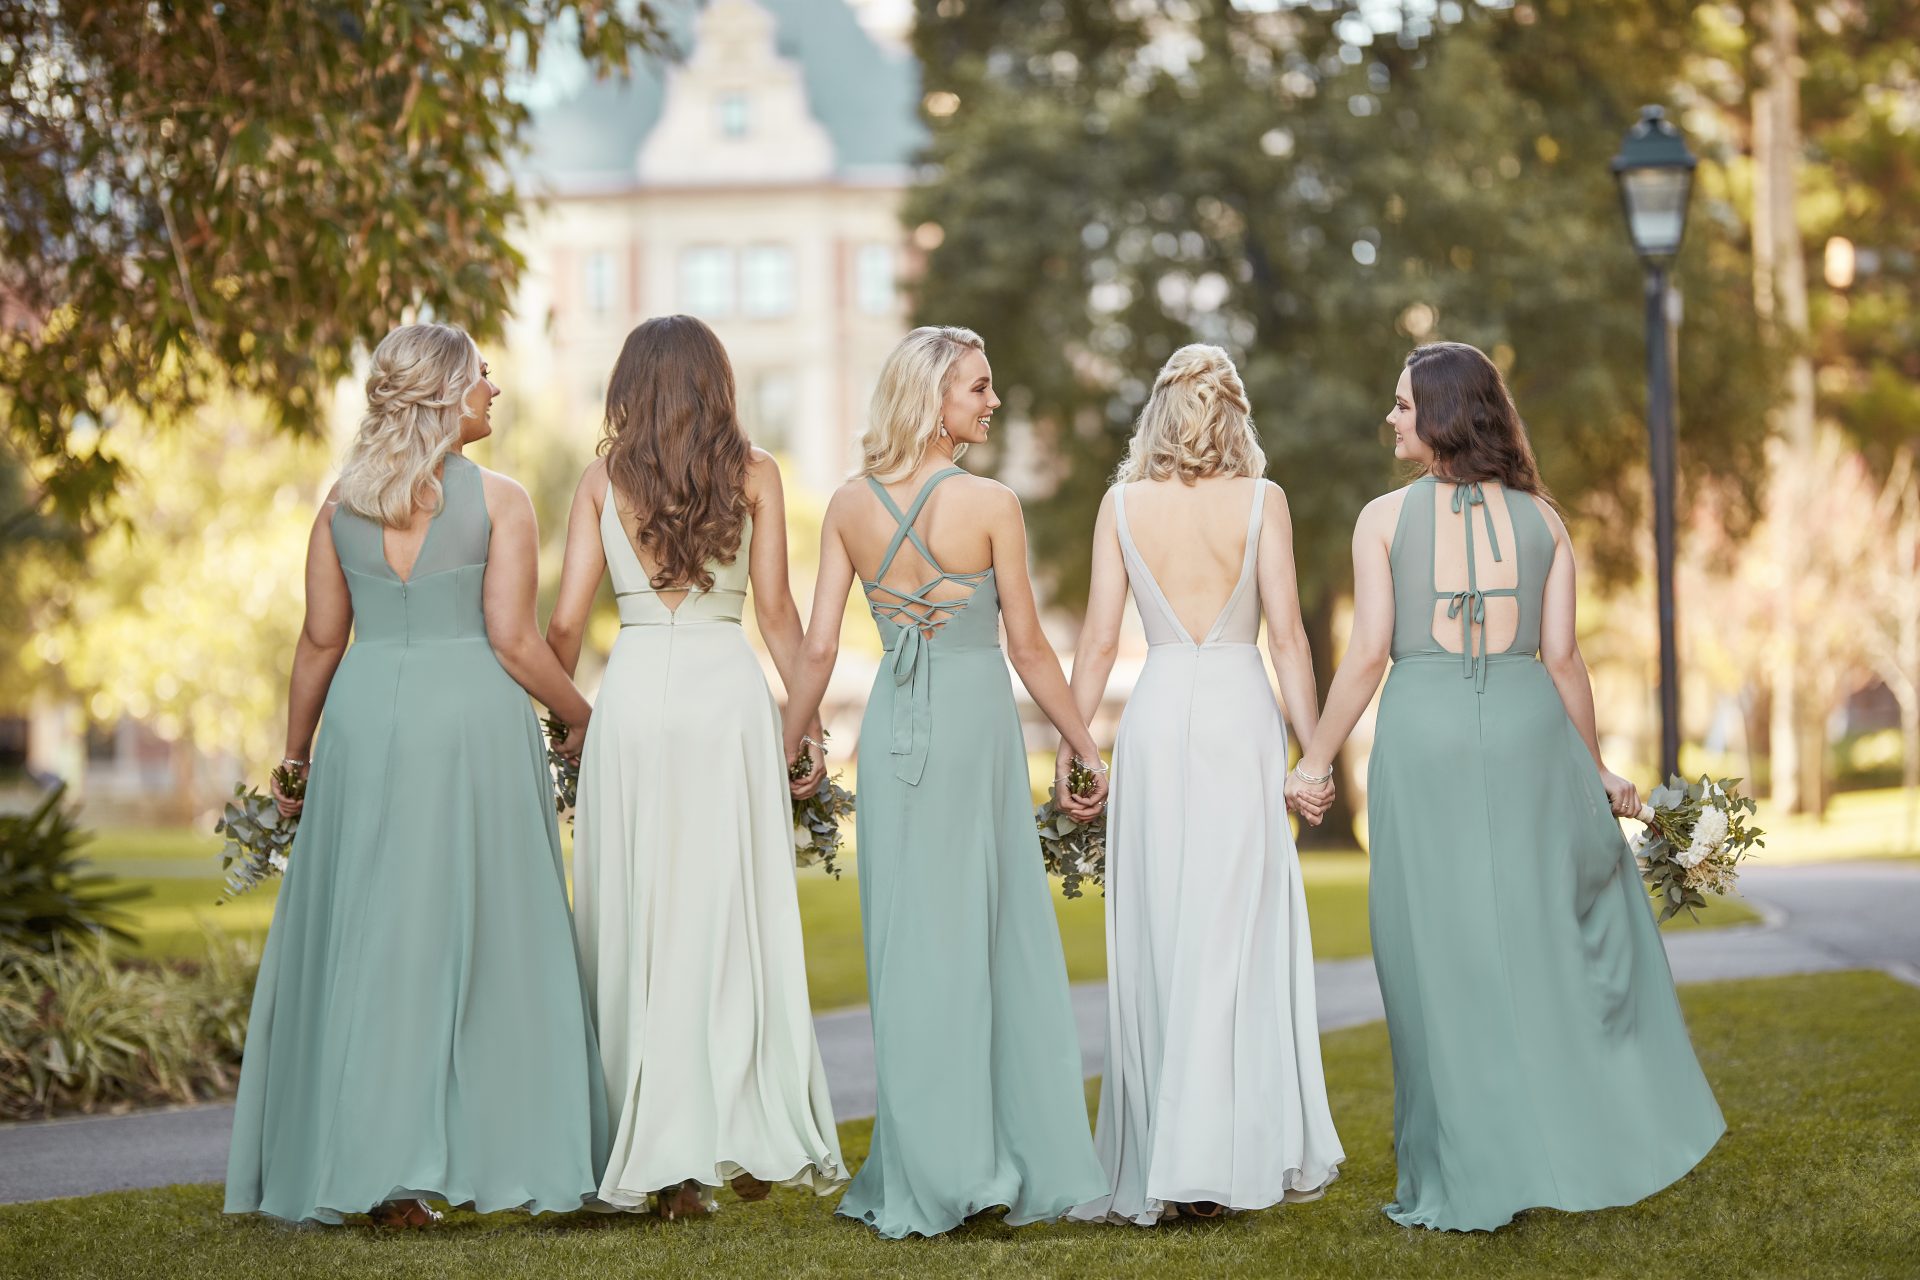 The Bridal Cottage | Bridesmaids Dresses, Bridesmaids Gowns, Maid of ...